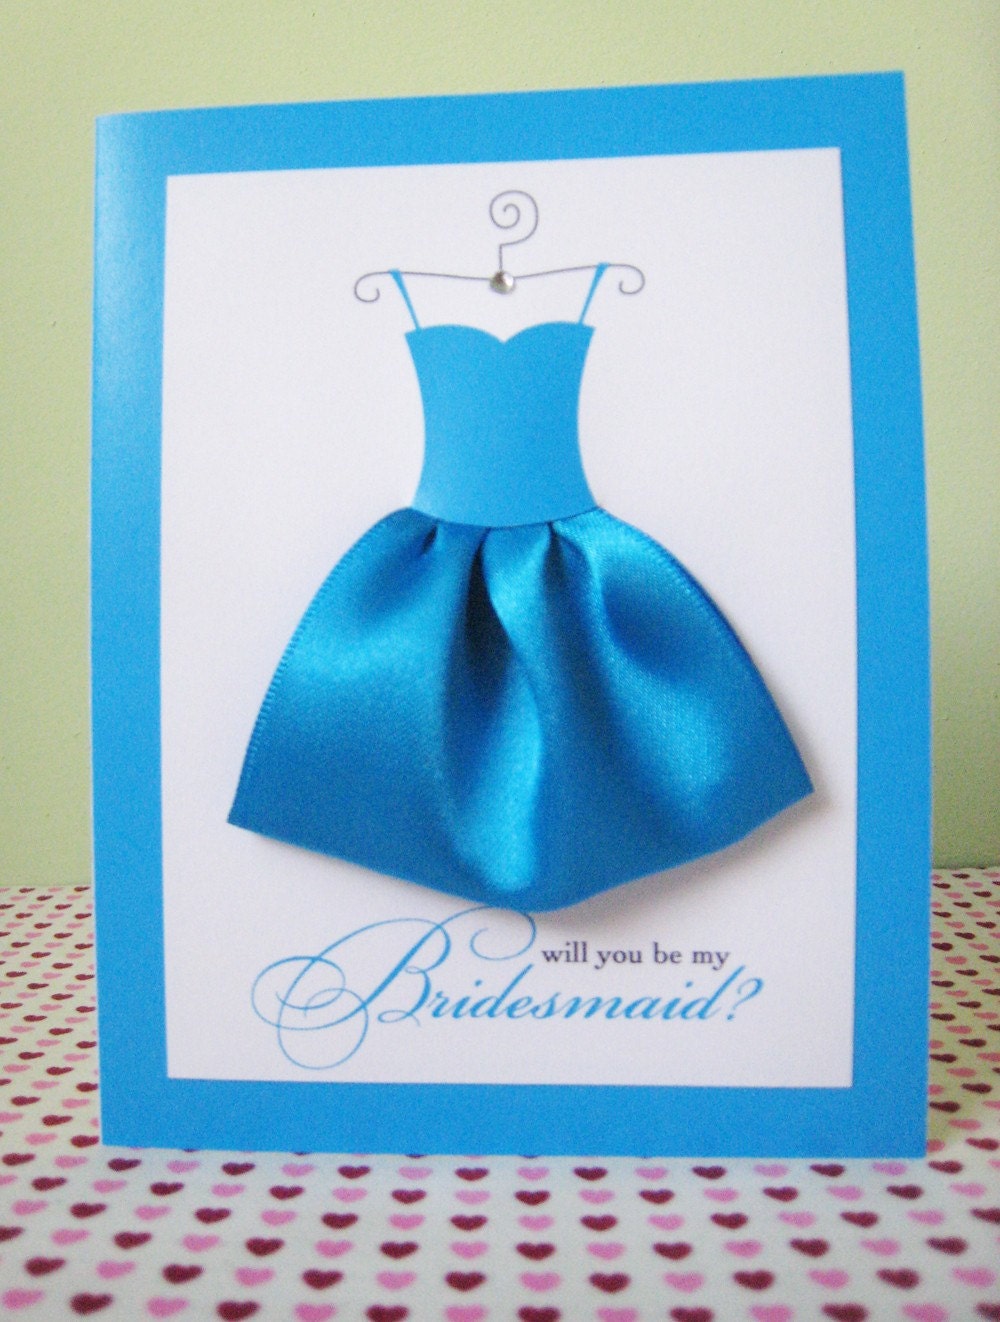  Paperie and are called Will you be my Bridesmaid Dress Wedding Cards